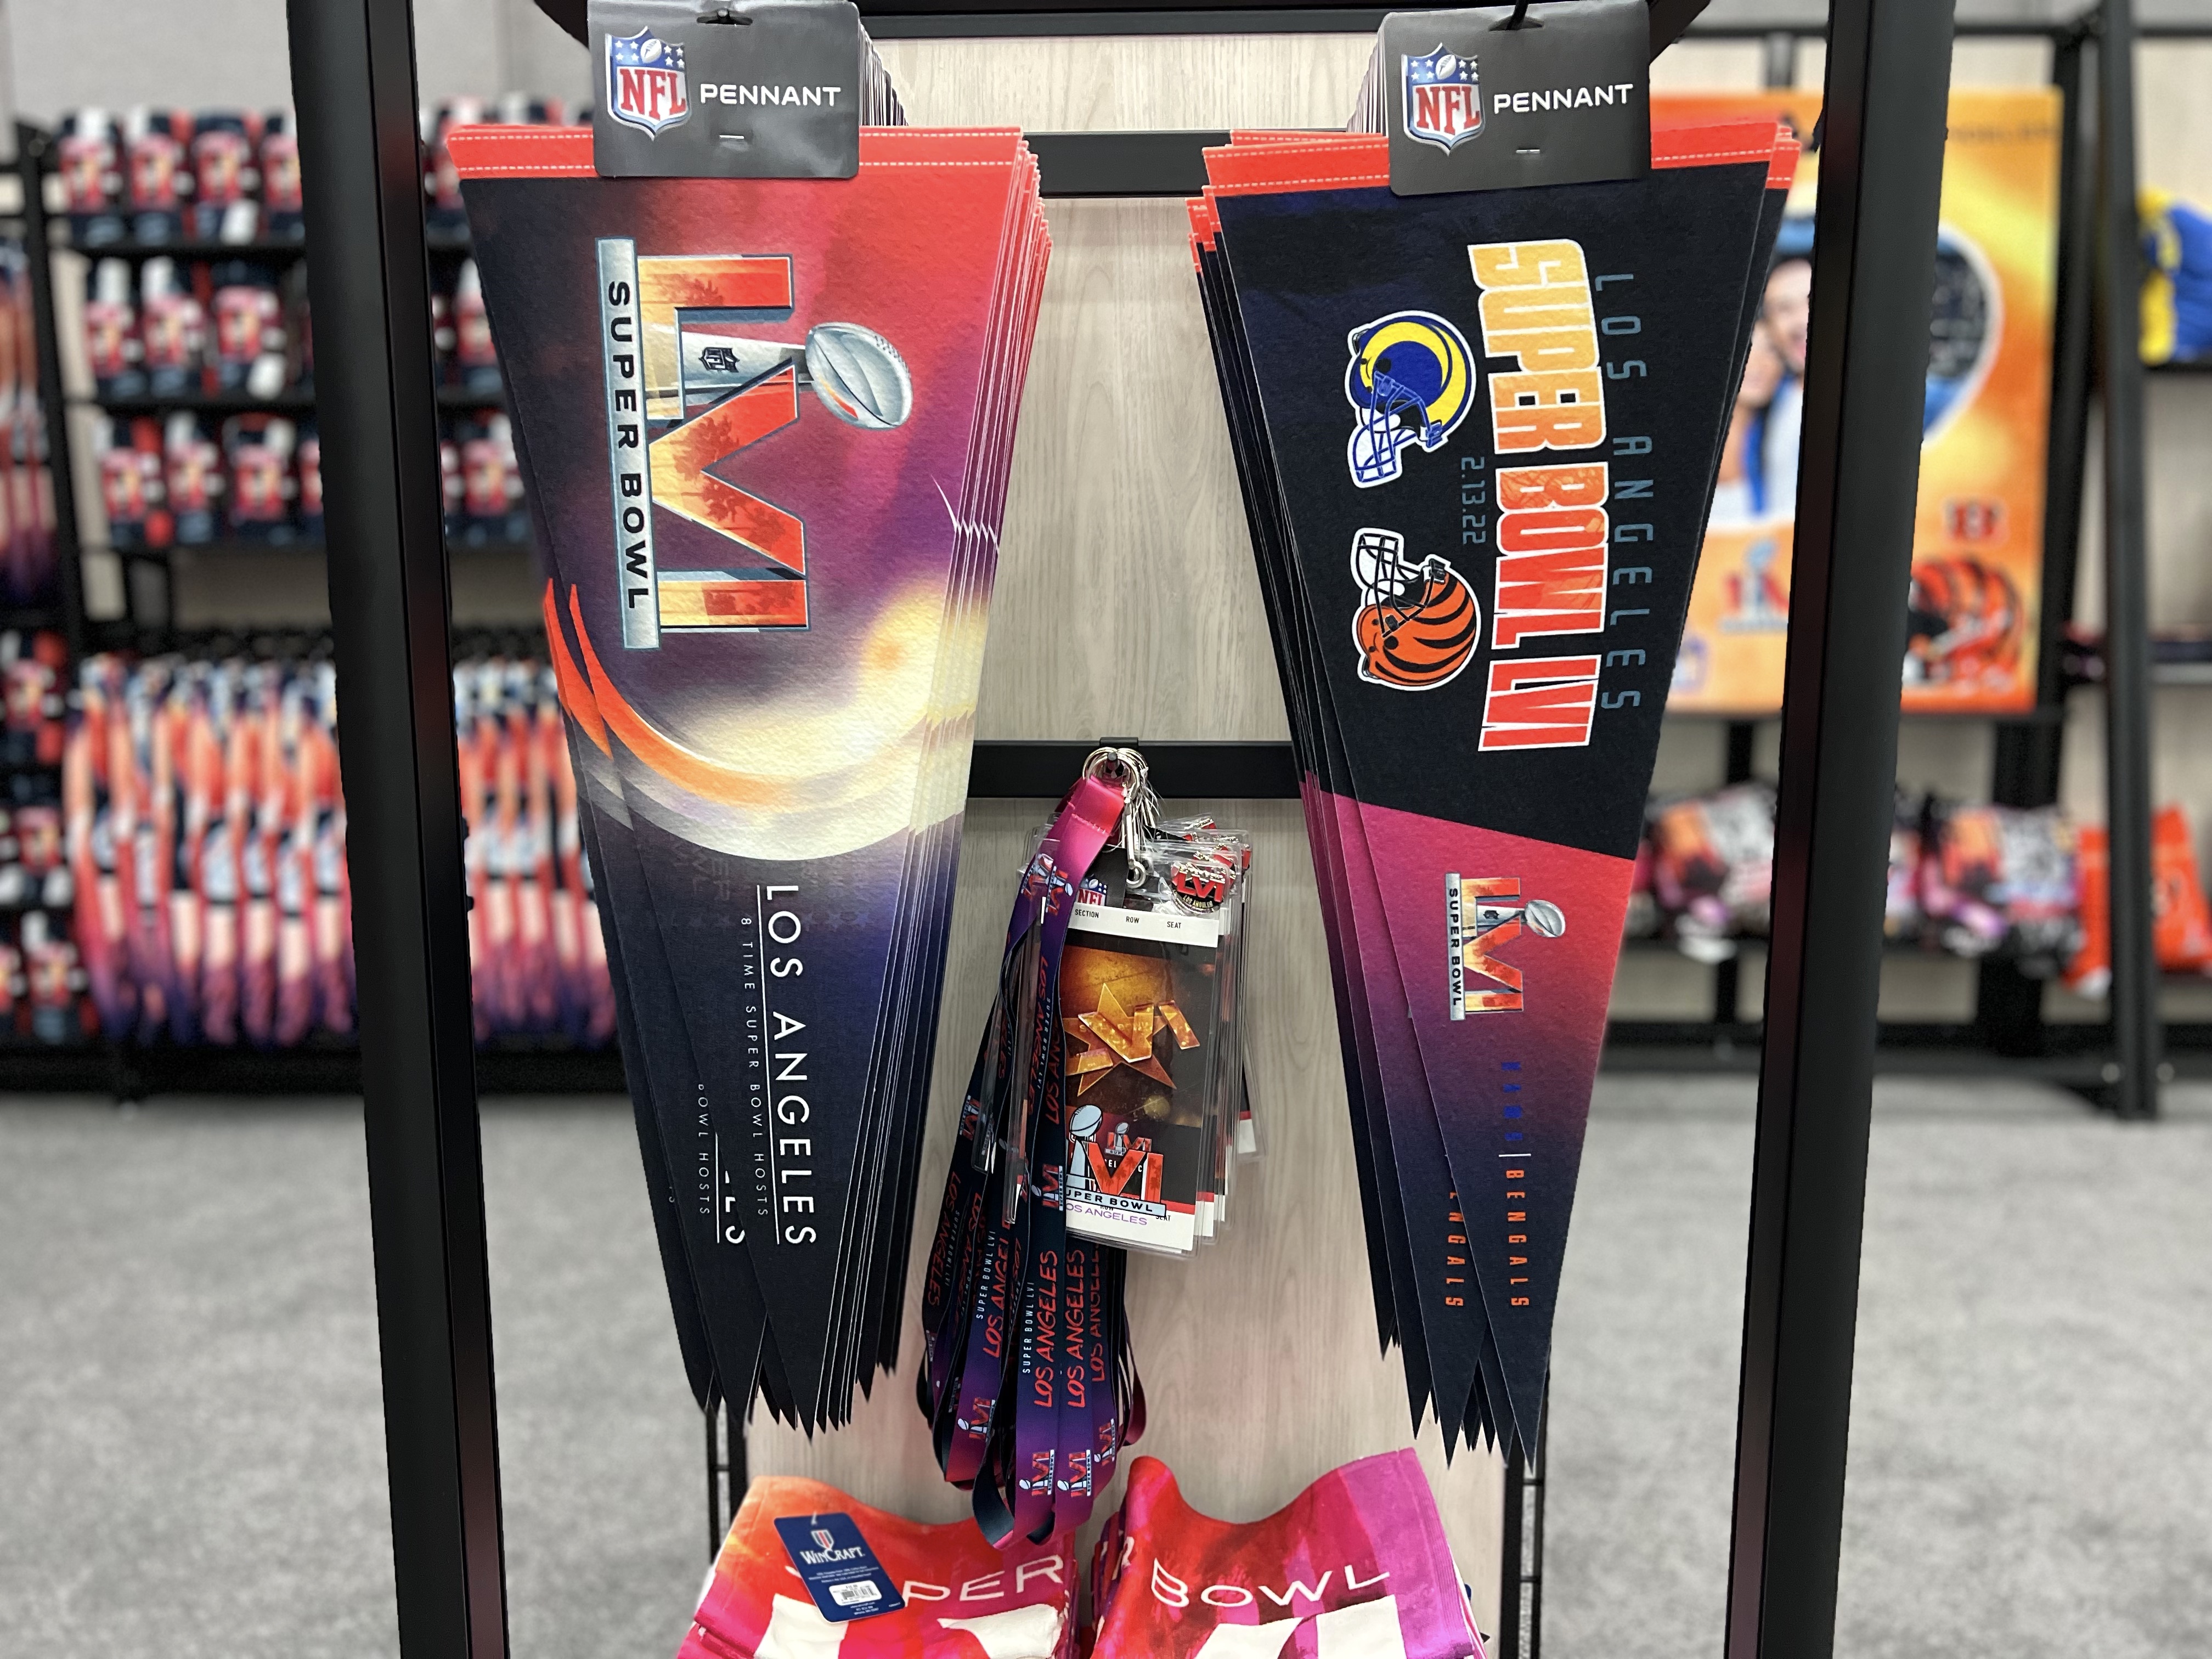 Los Angeles Rams Super Bowl Championship gear: How to get shirts,  bobbleheads, jerseys 